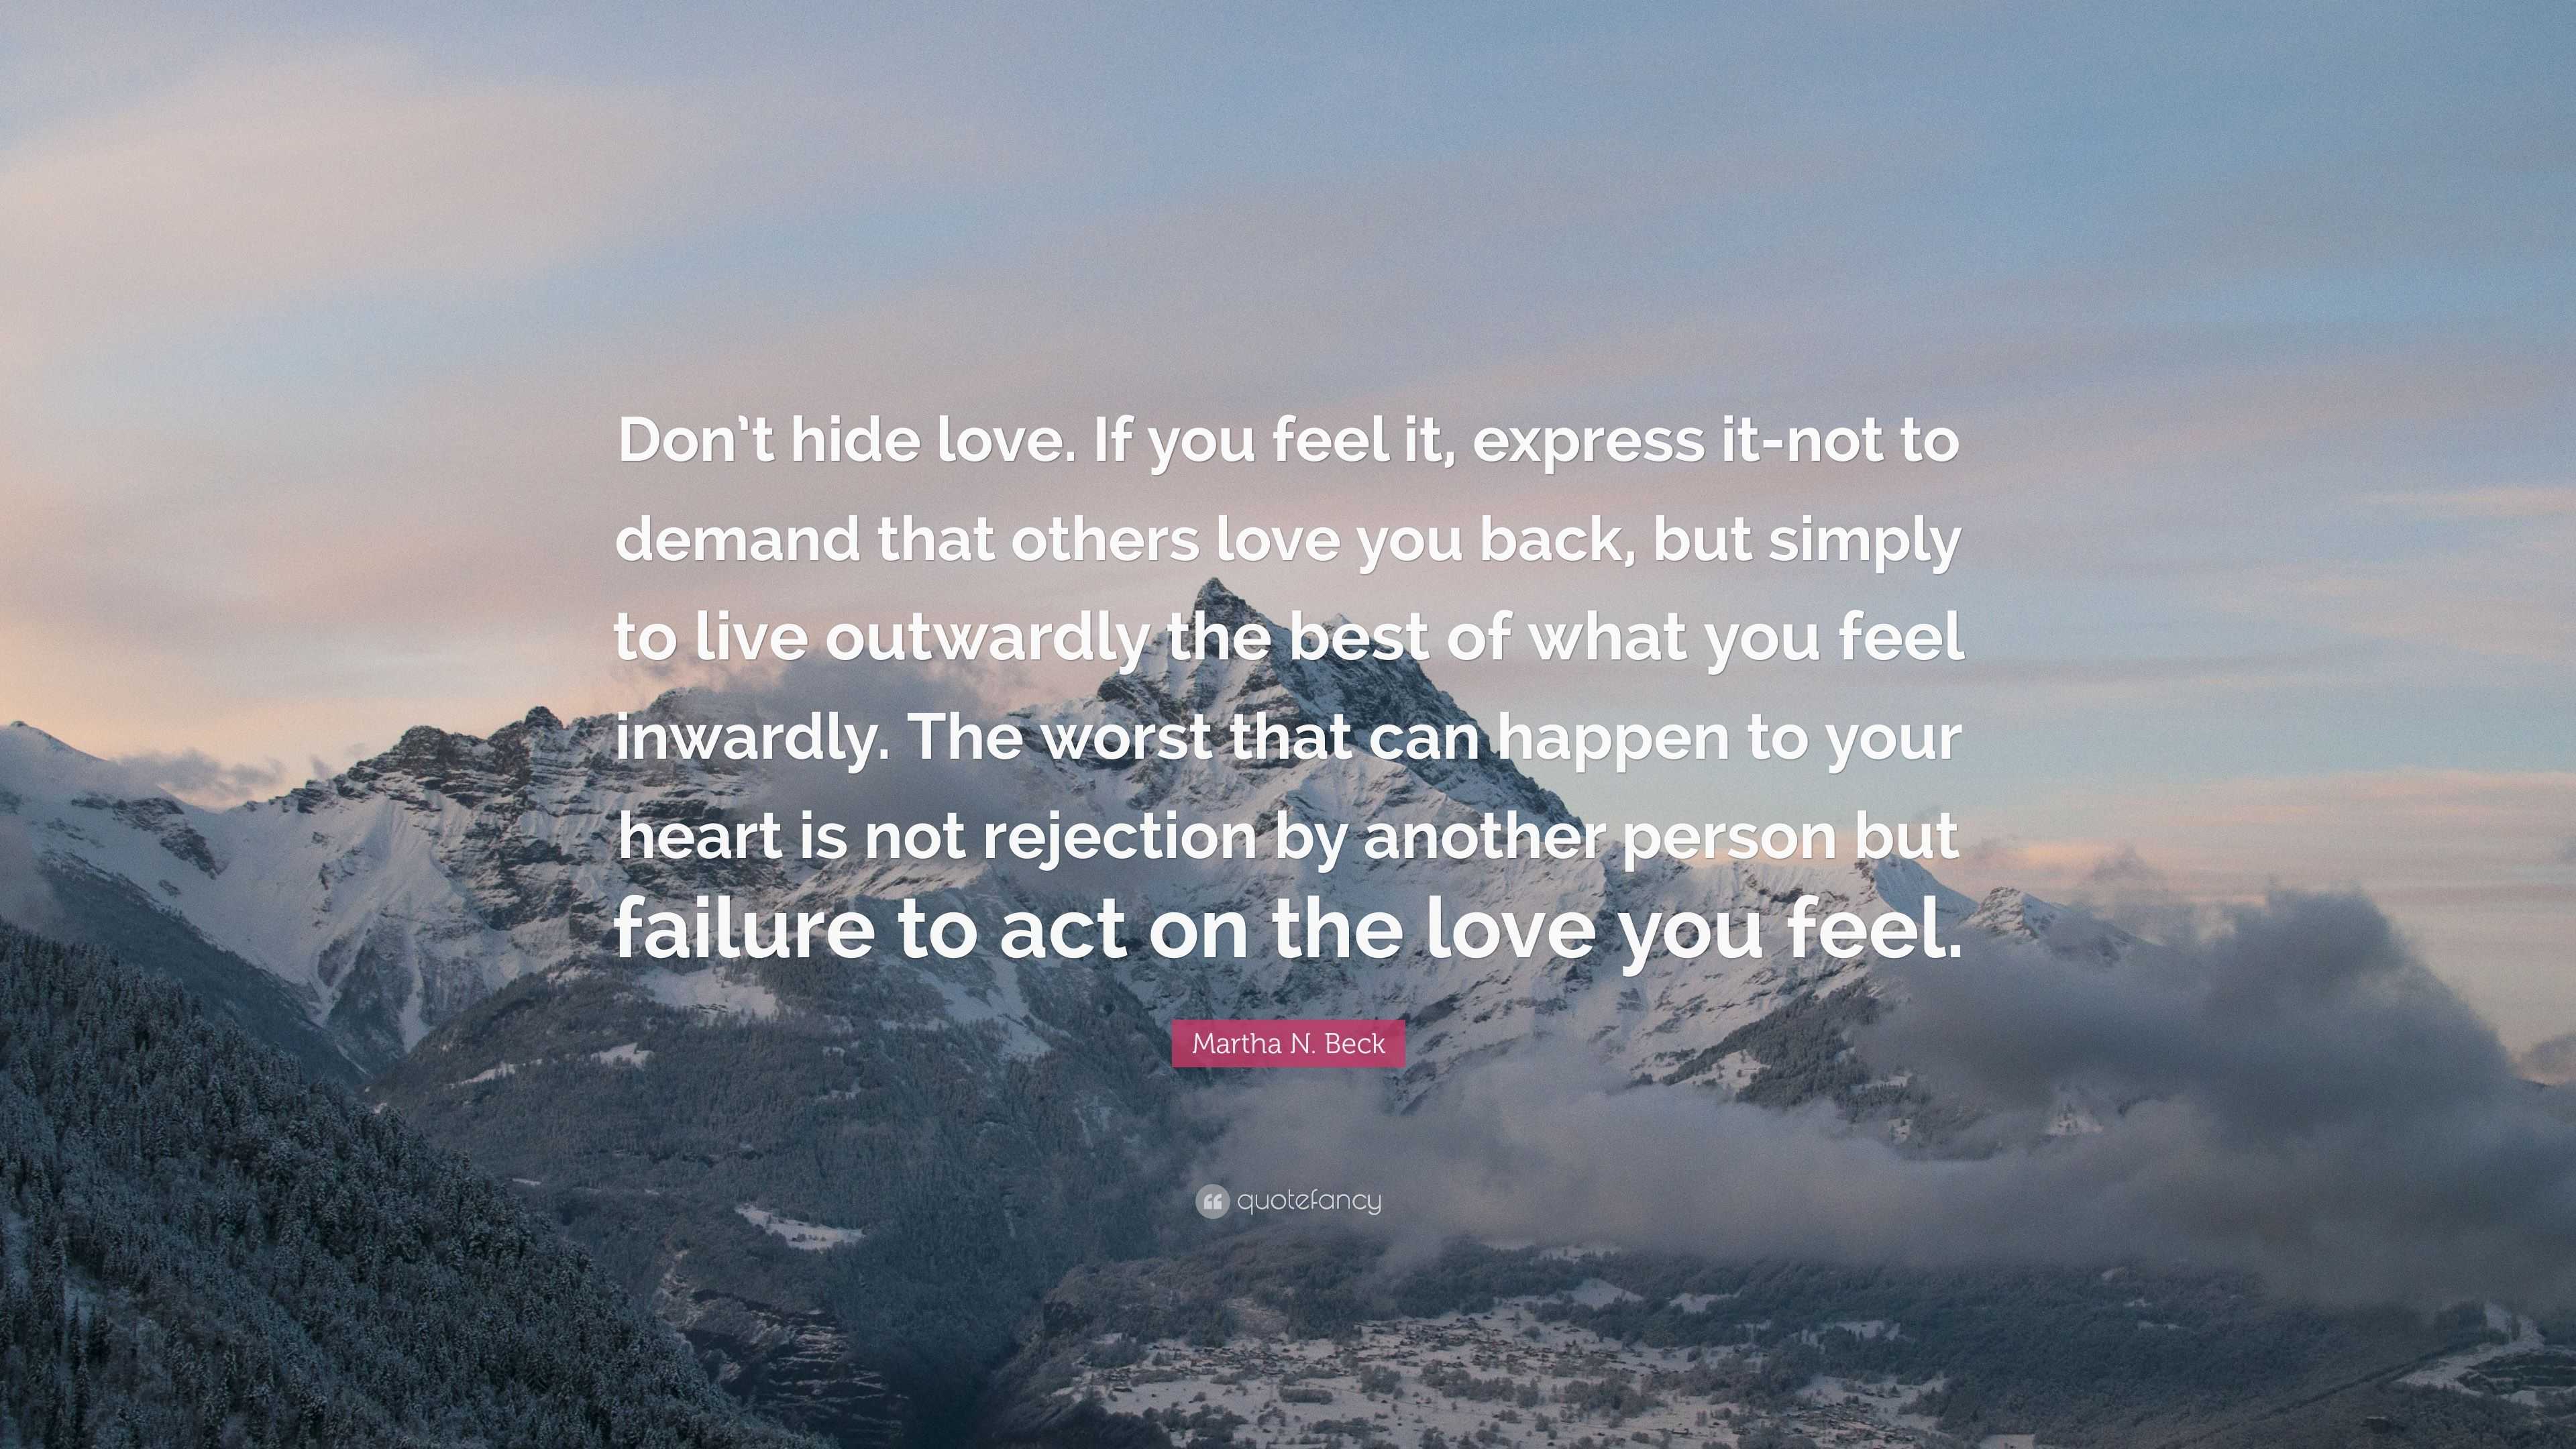 Martha N. Beck Quote: “Don't hide love. If you feel it, express it